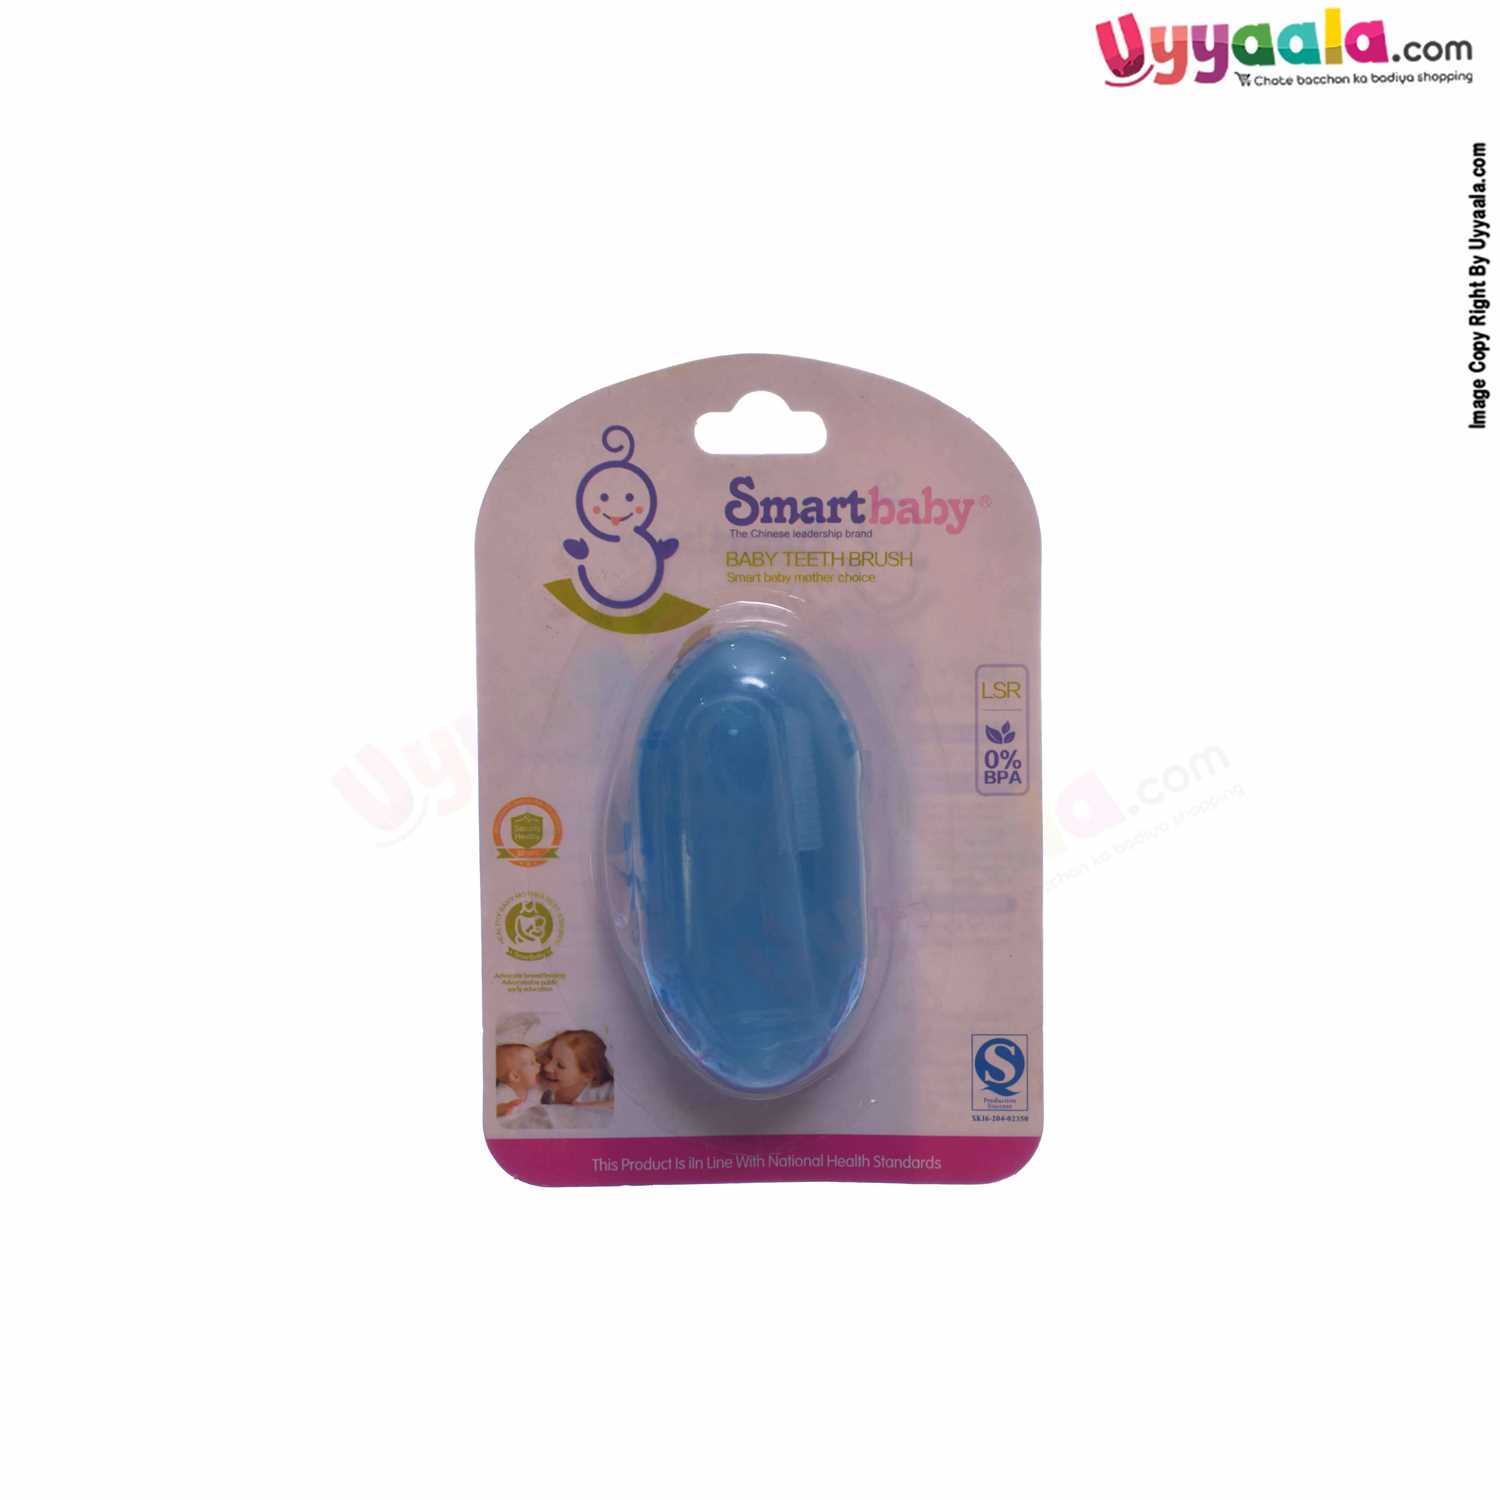 SMART BABY Soft Silicone Baby Finger Toothbrush with Storage Case, 3m+ age